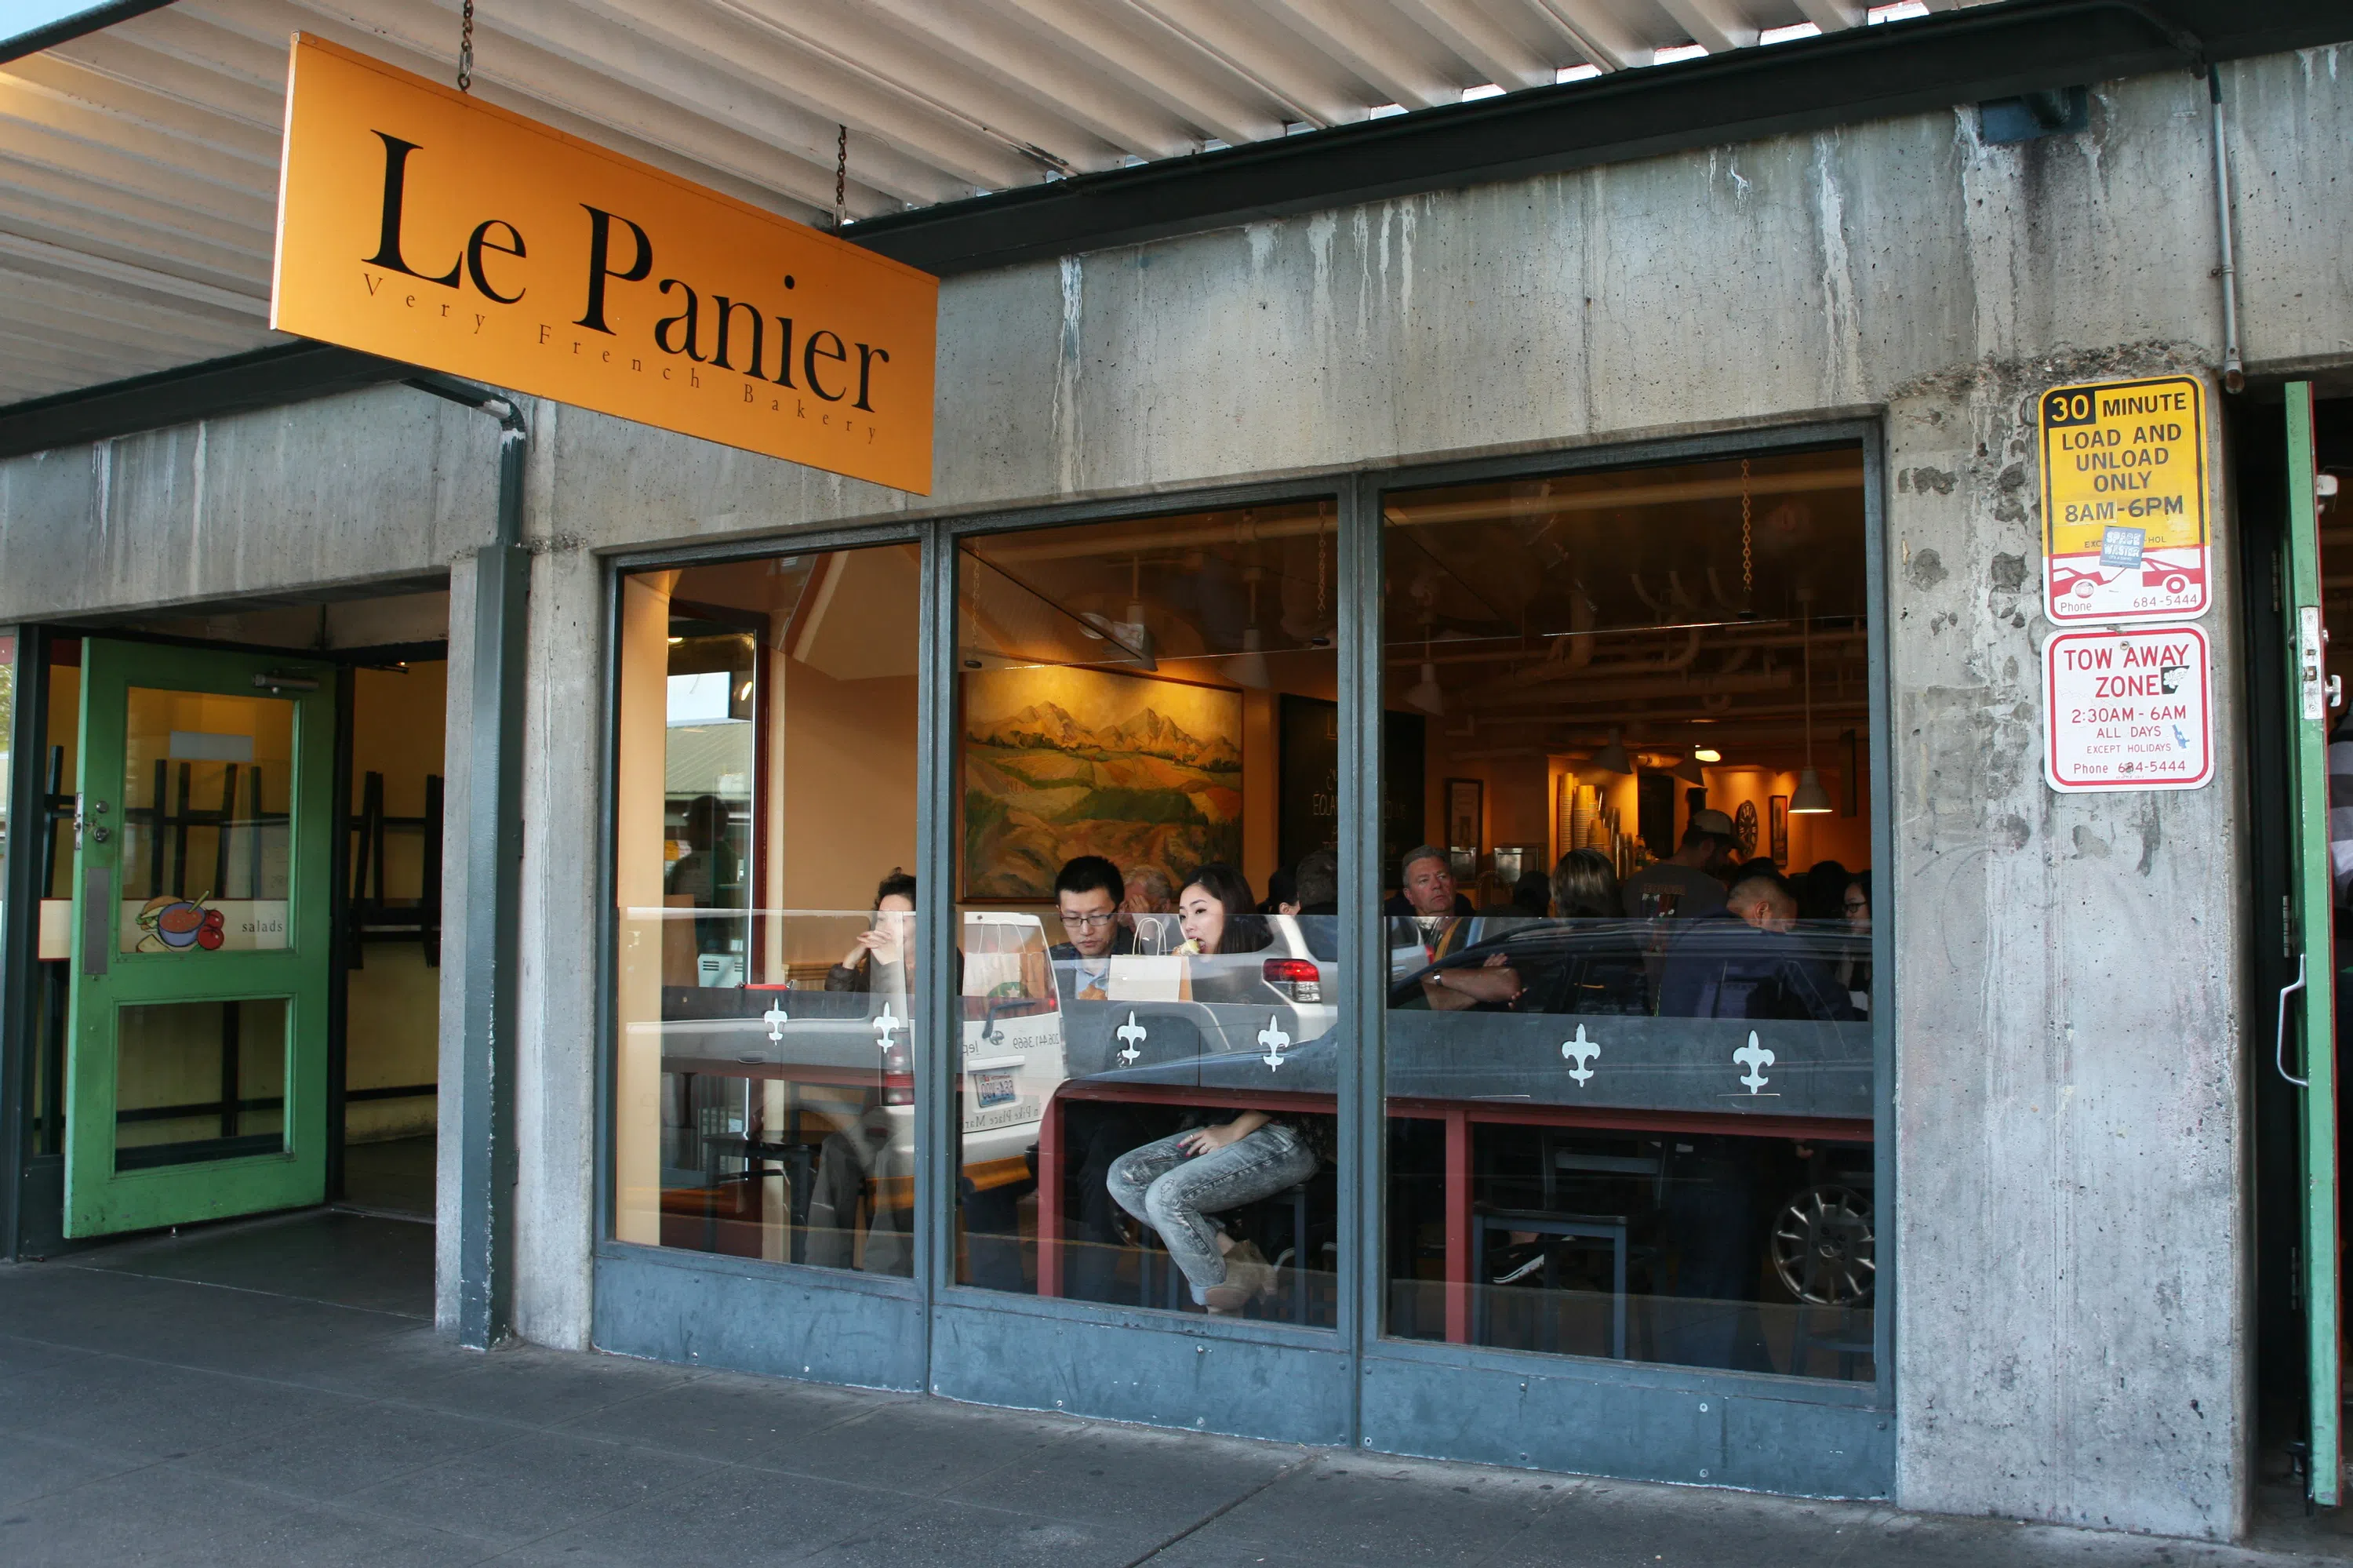 View of the sign outside Le Panier